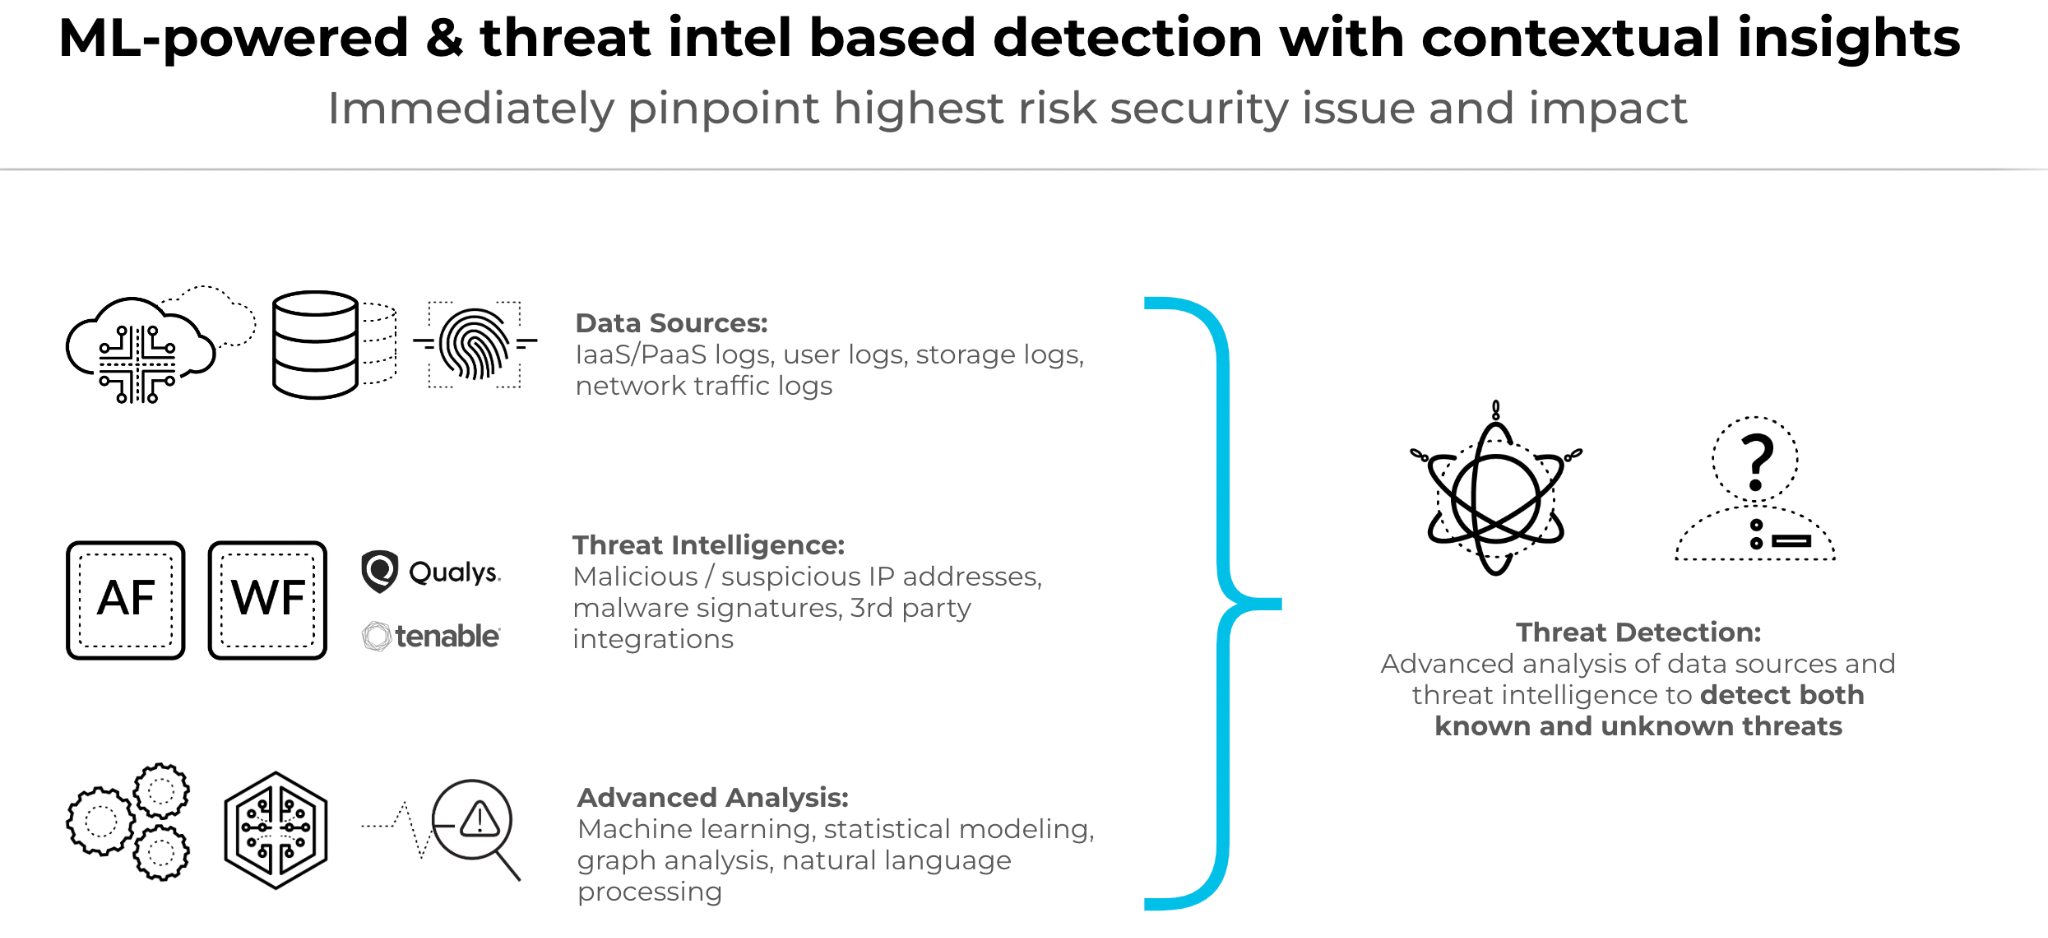 ML-powered and intel based threat detection